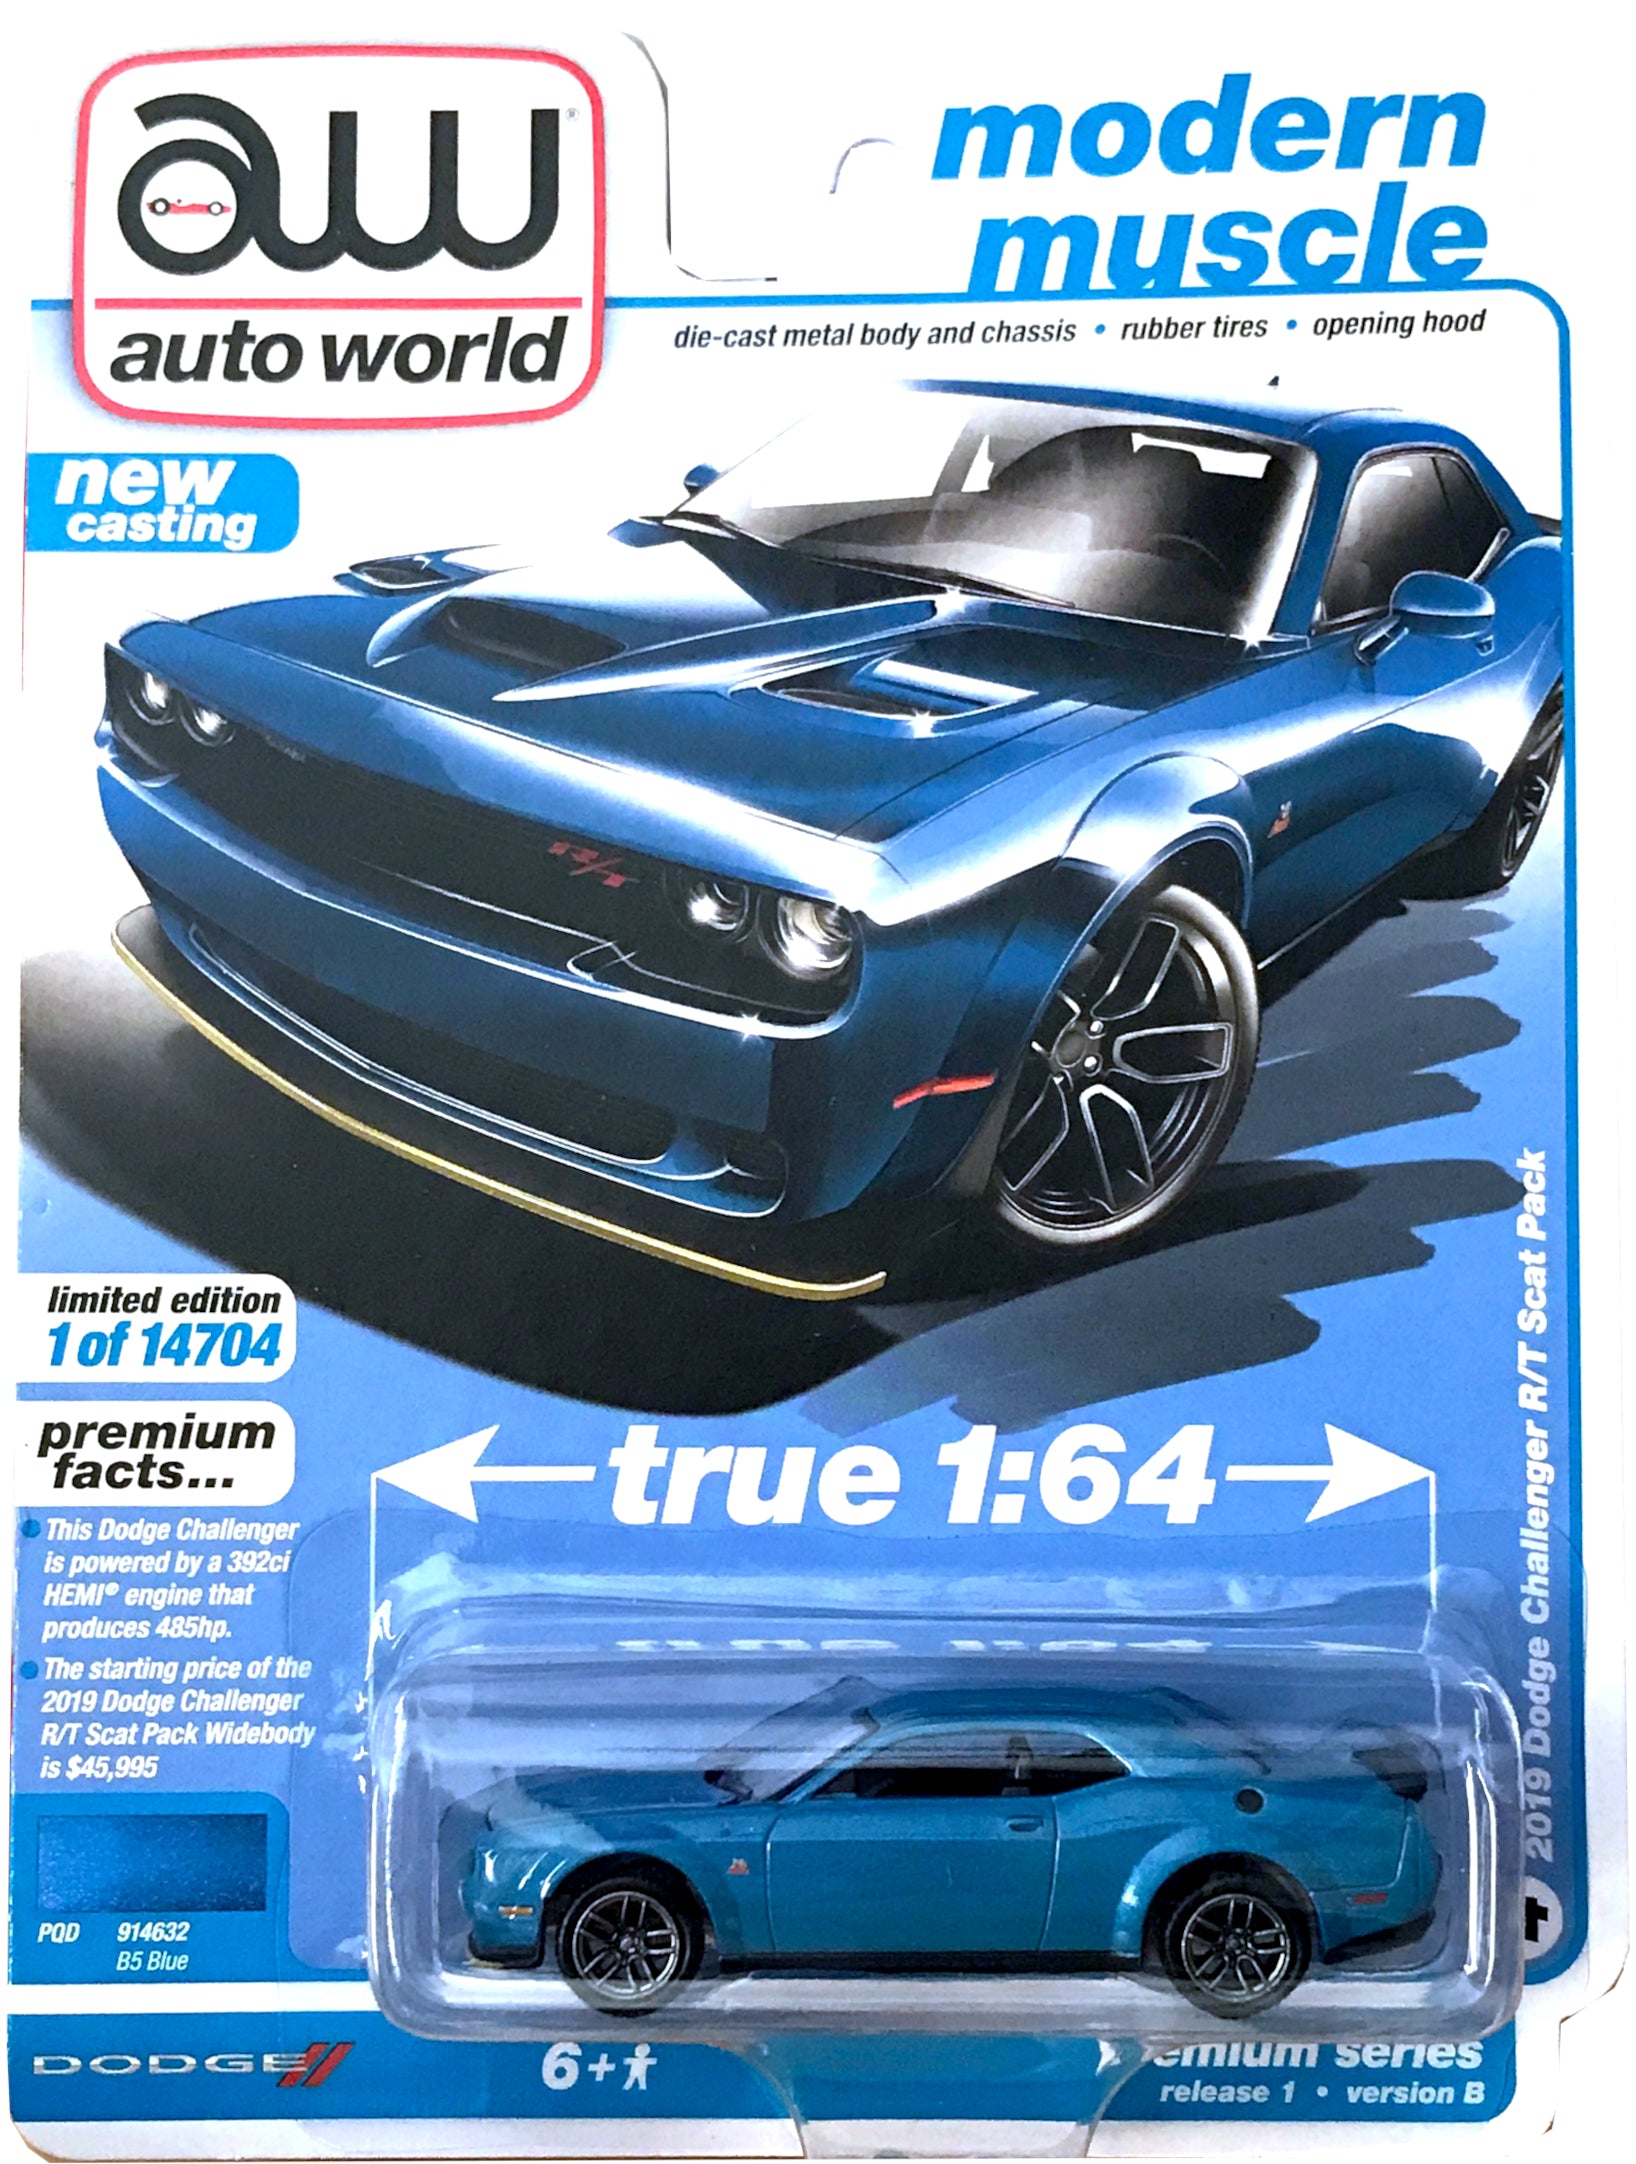 2021 Auto World - 2019 Dodge Challenger R/T Scat Pack (Blue) AW64302-1B4